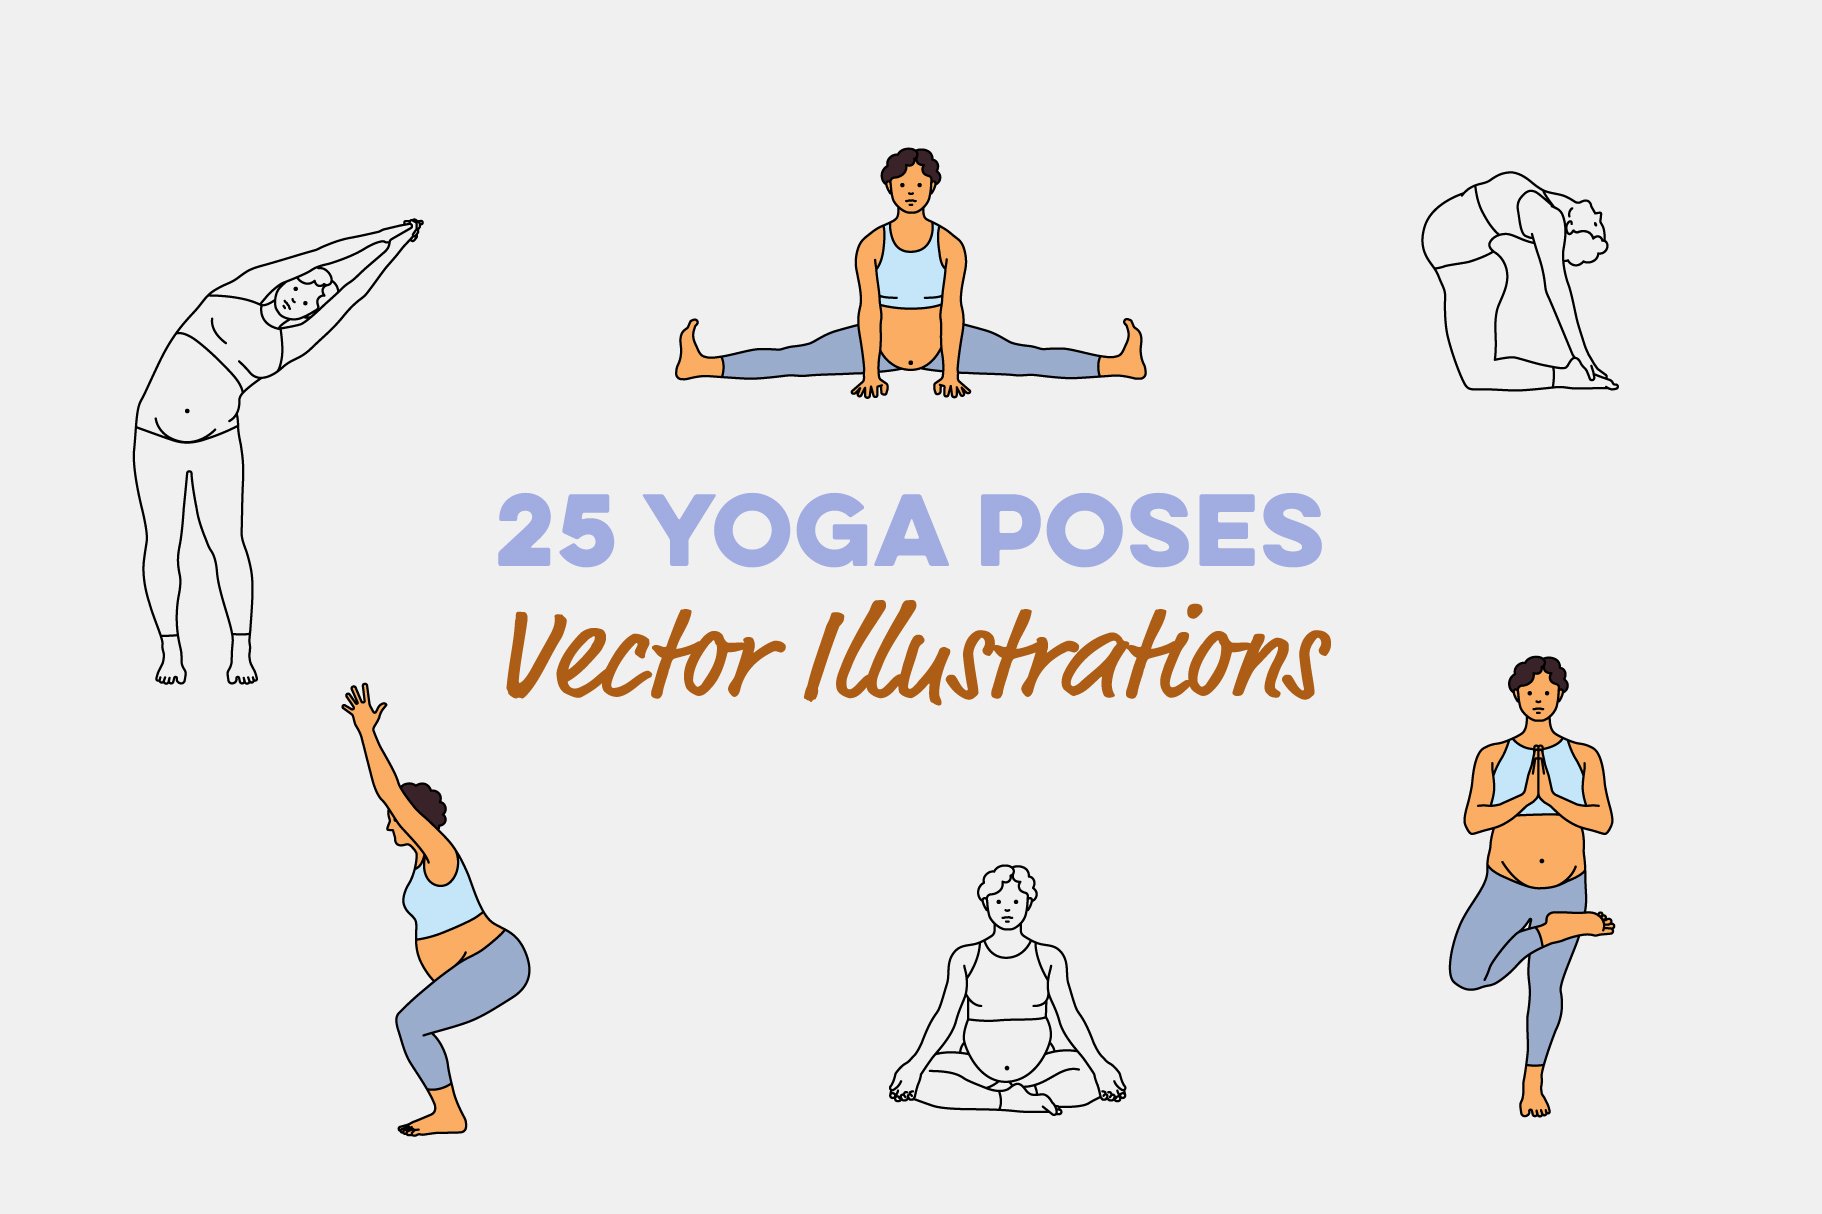 25 Pregnancy Yoga Poses cover image.